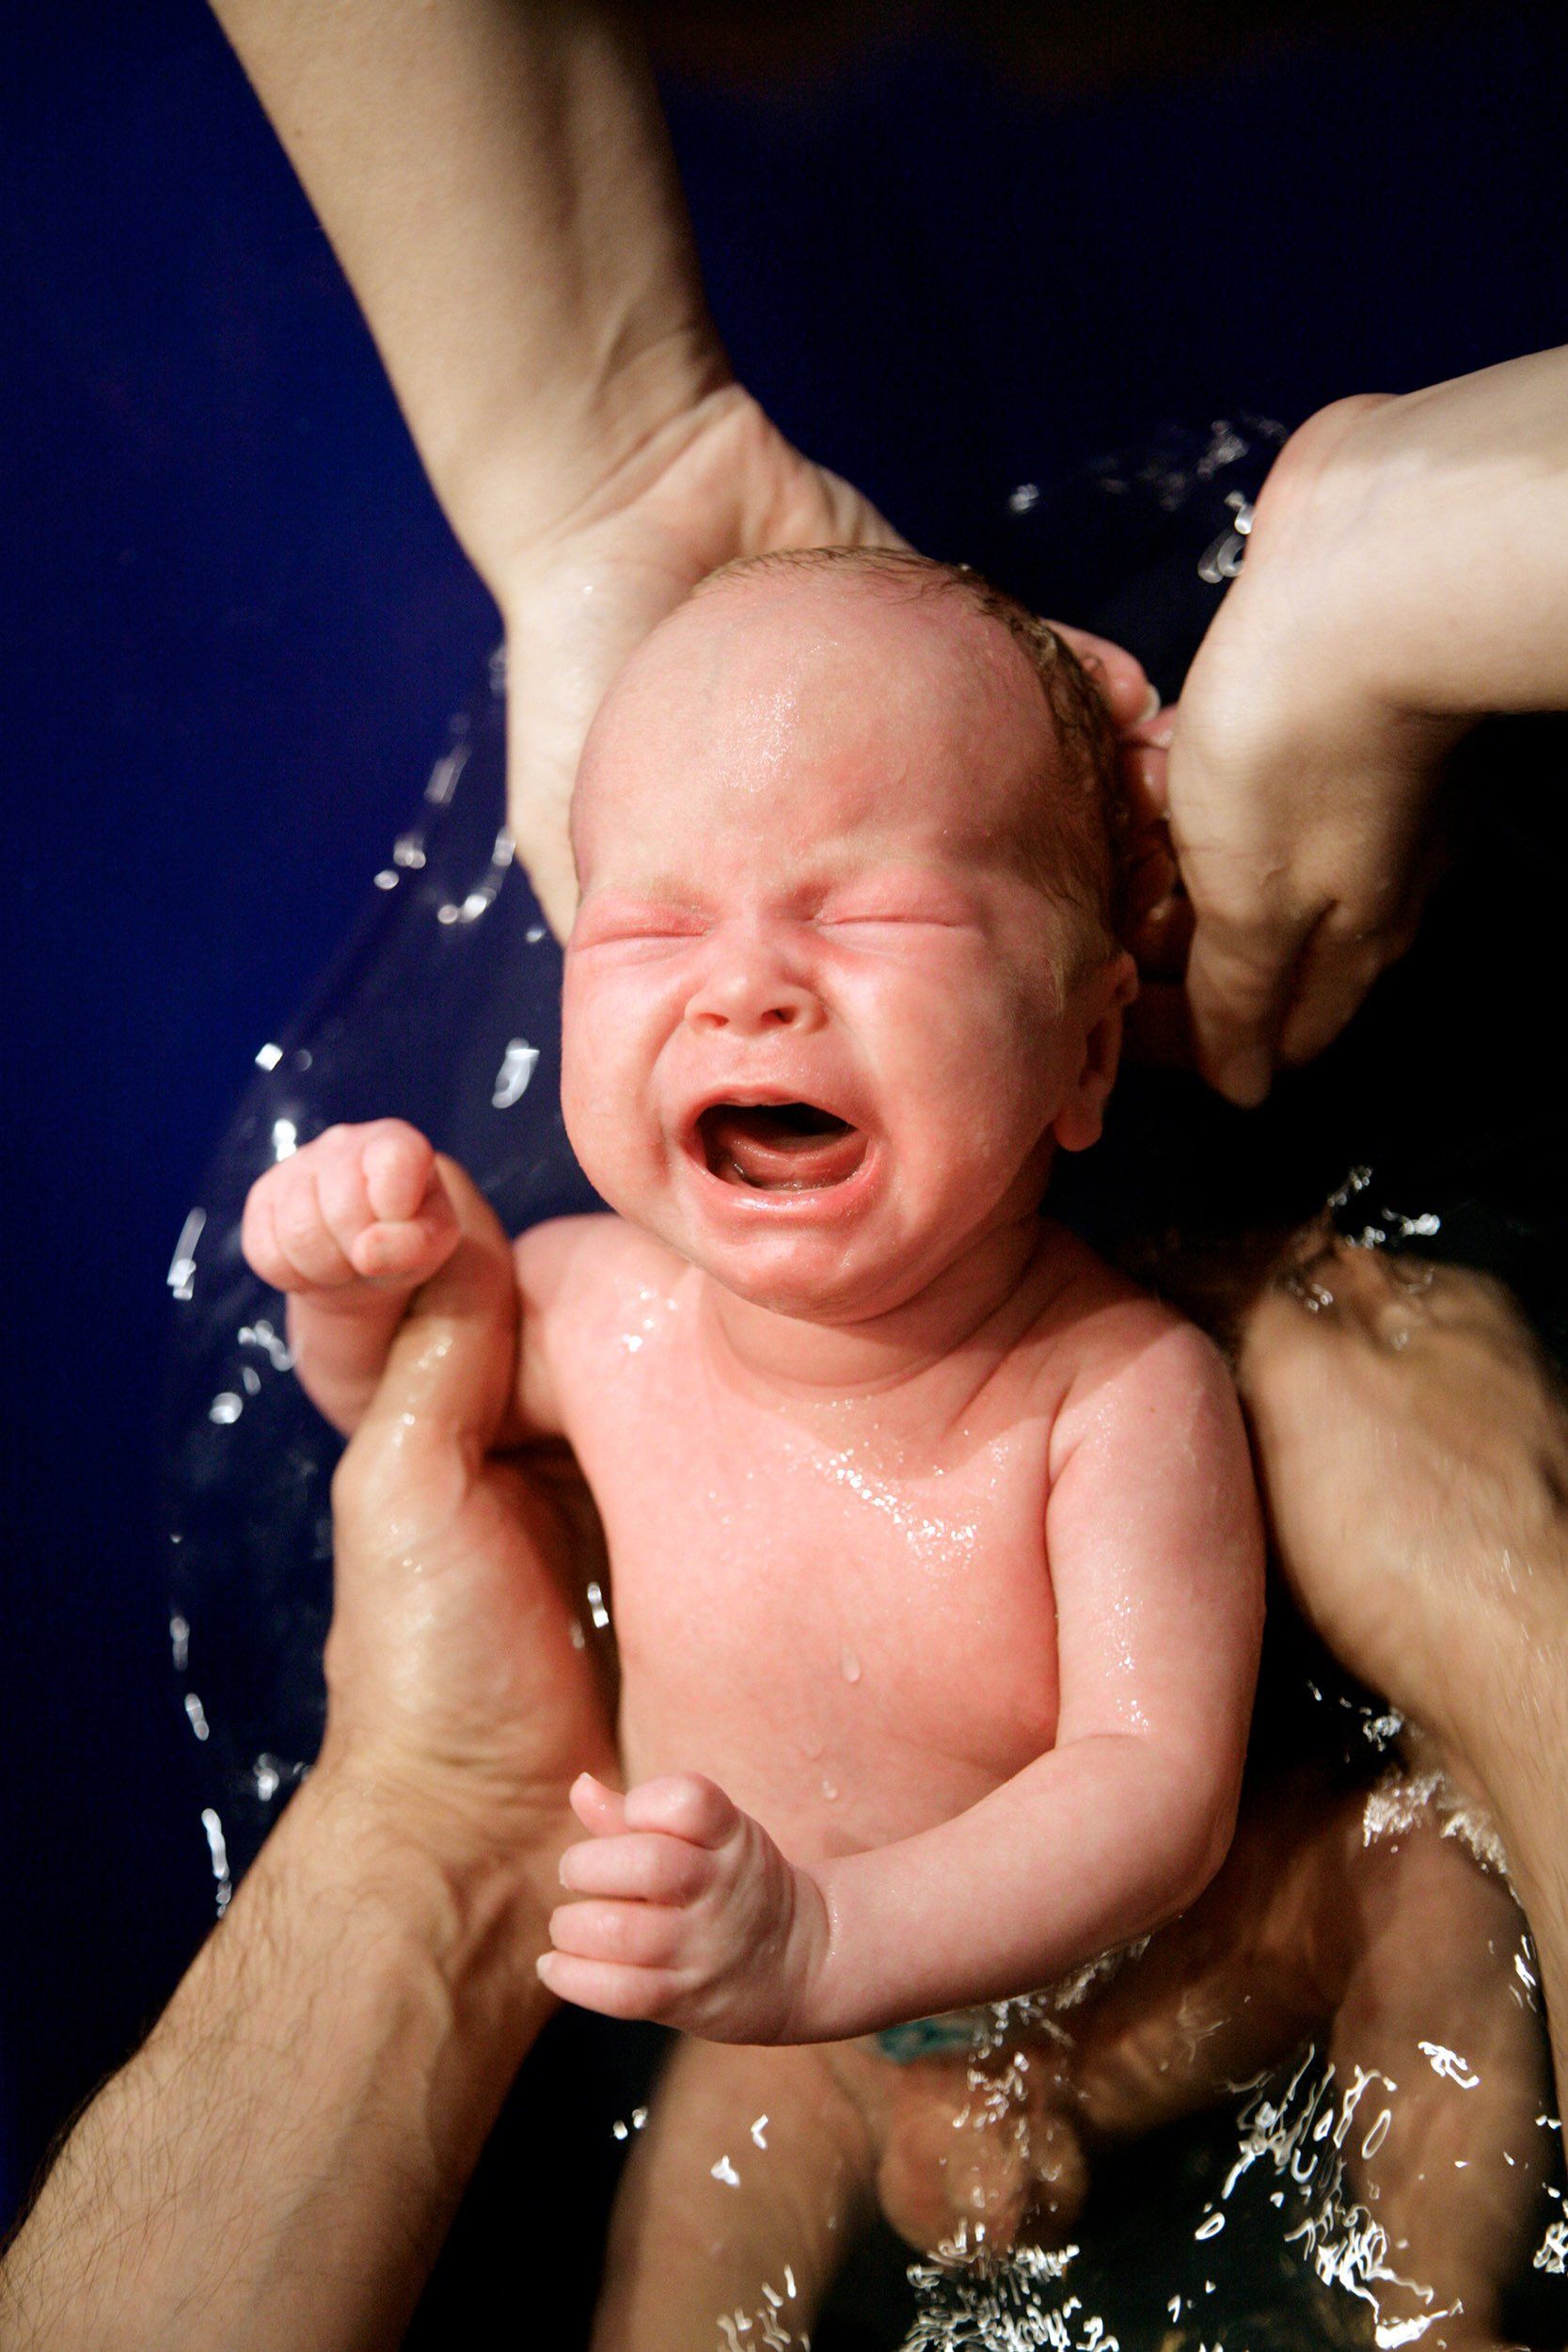 Hands of parents bathing their baby boy